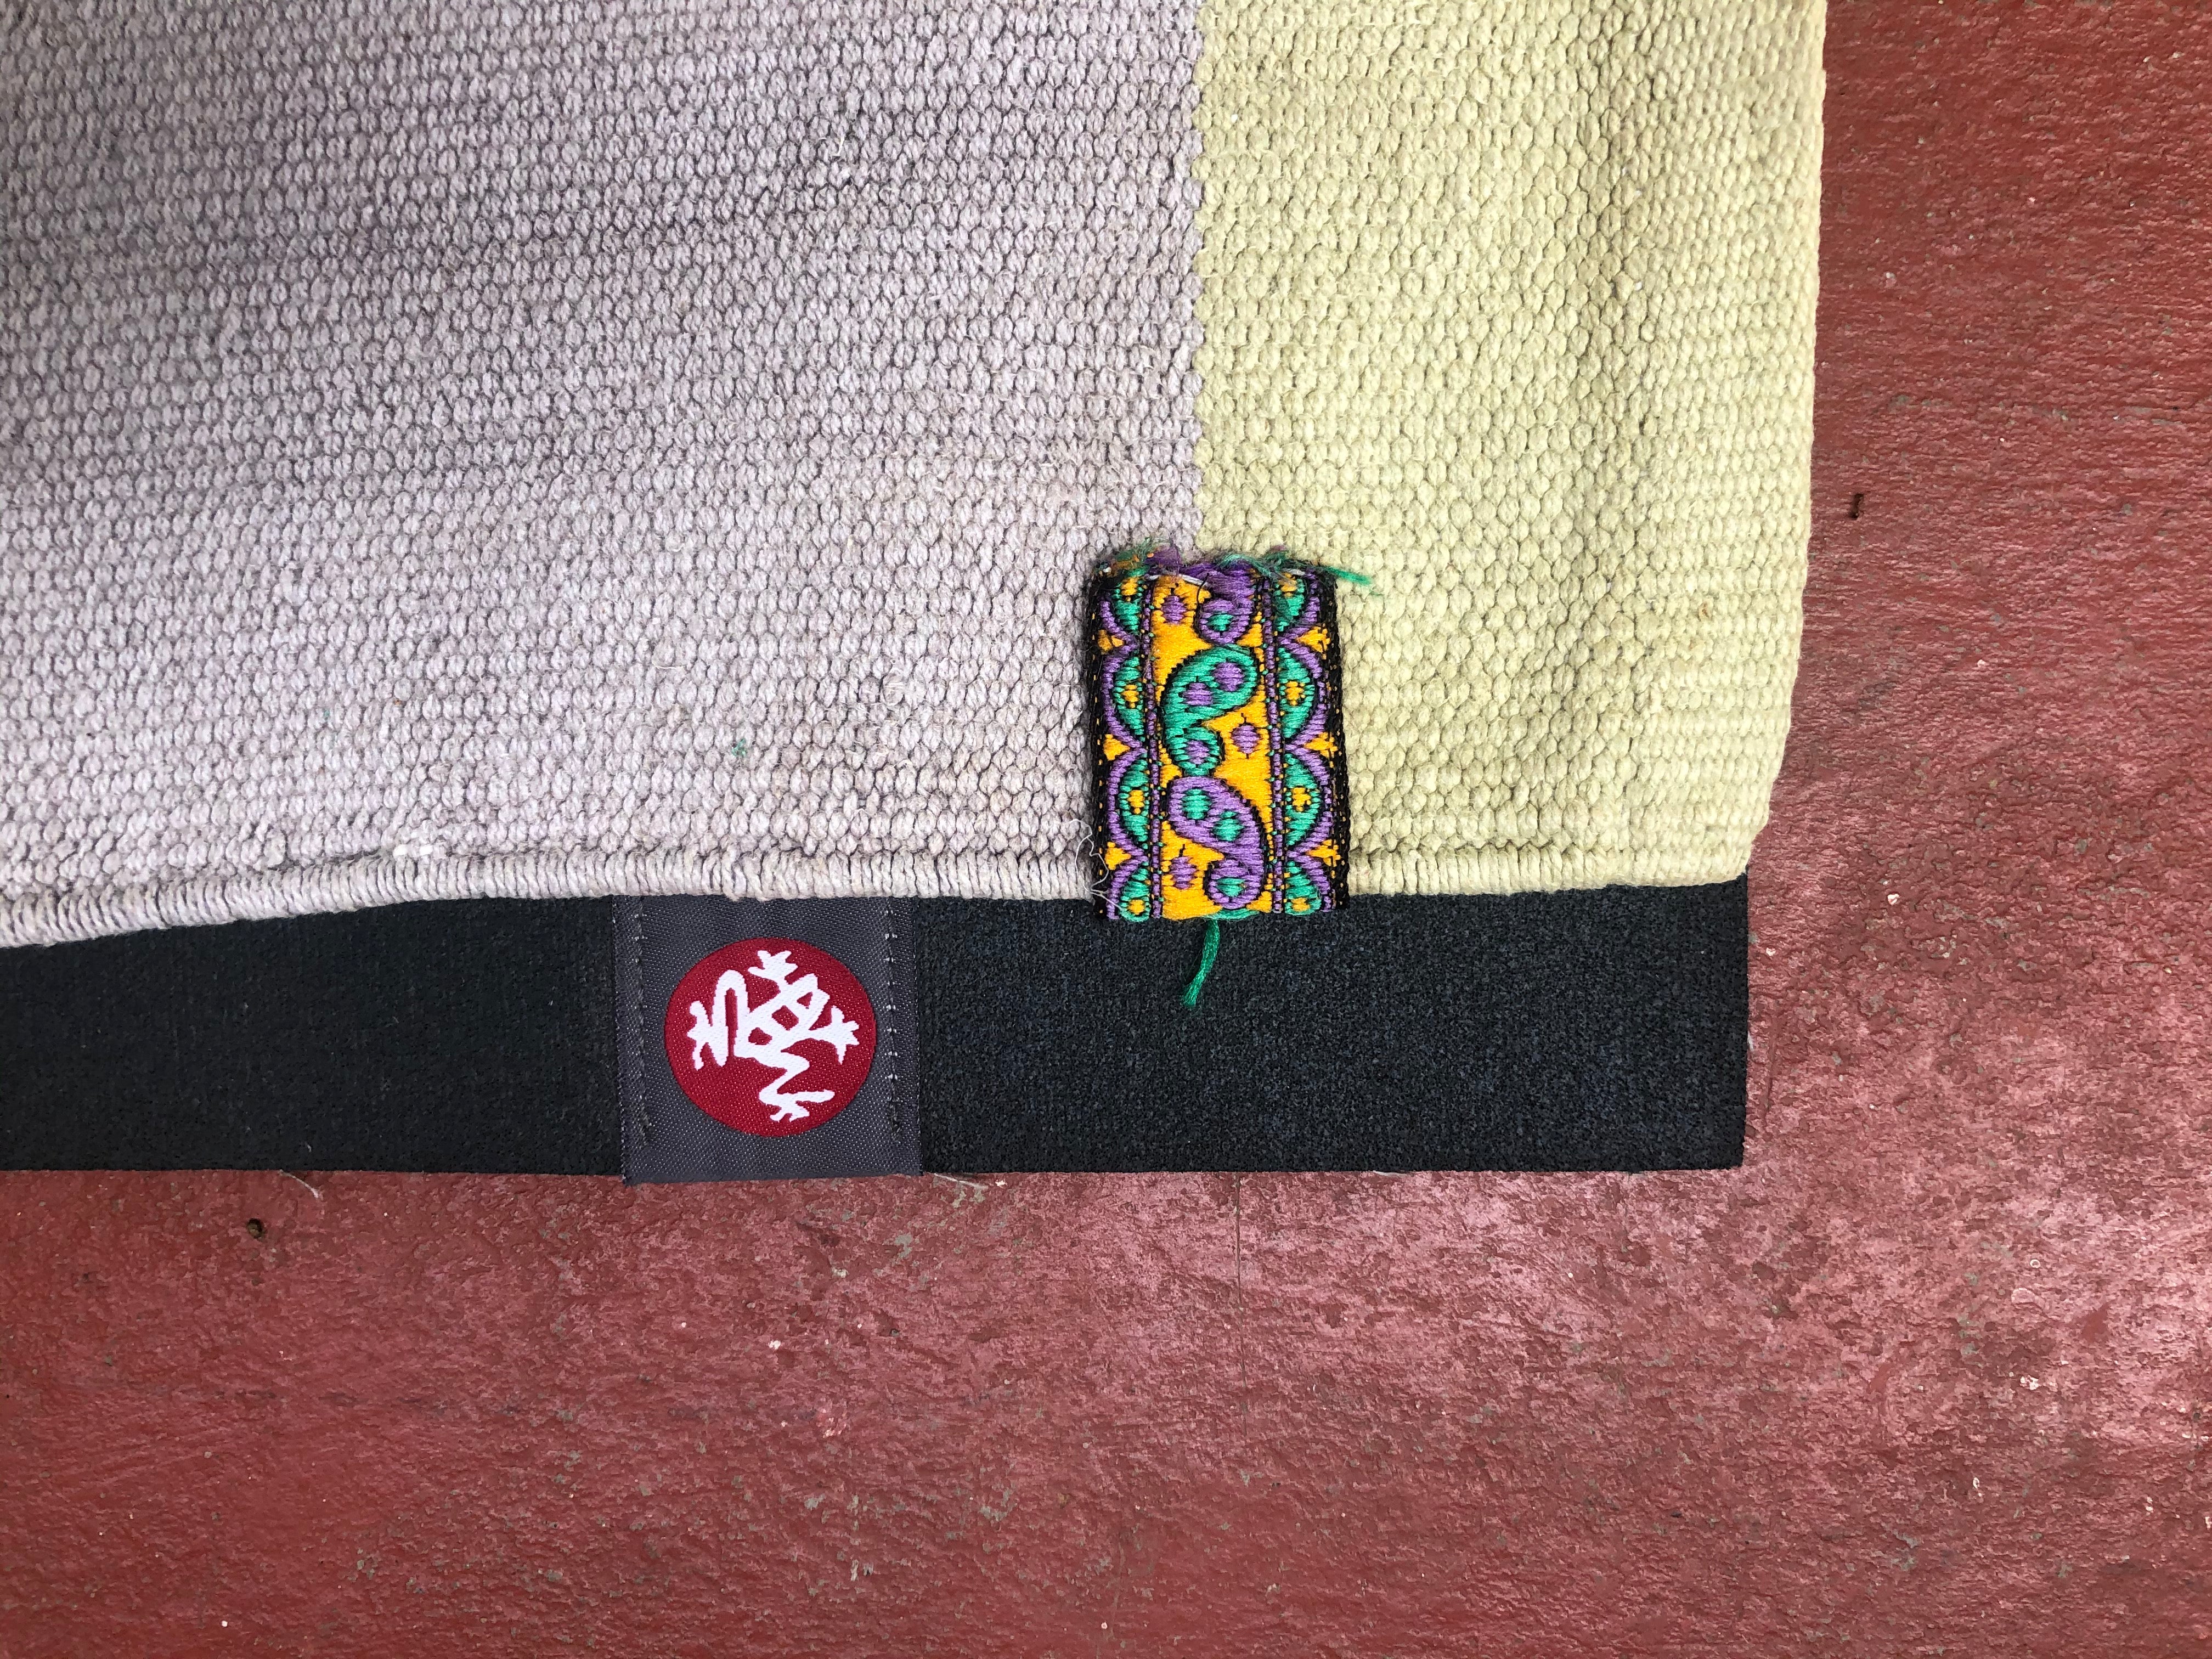 Best towels for yoga mats are not actually towels - but hand weaved mysore yoga rugs. Yoga rugs will stay on the place during the whole yoga practice. 